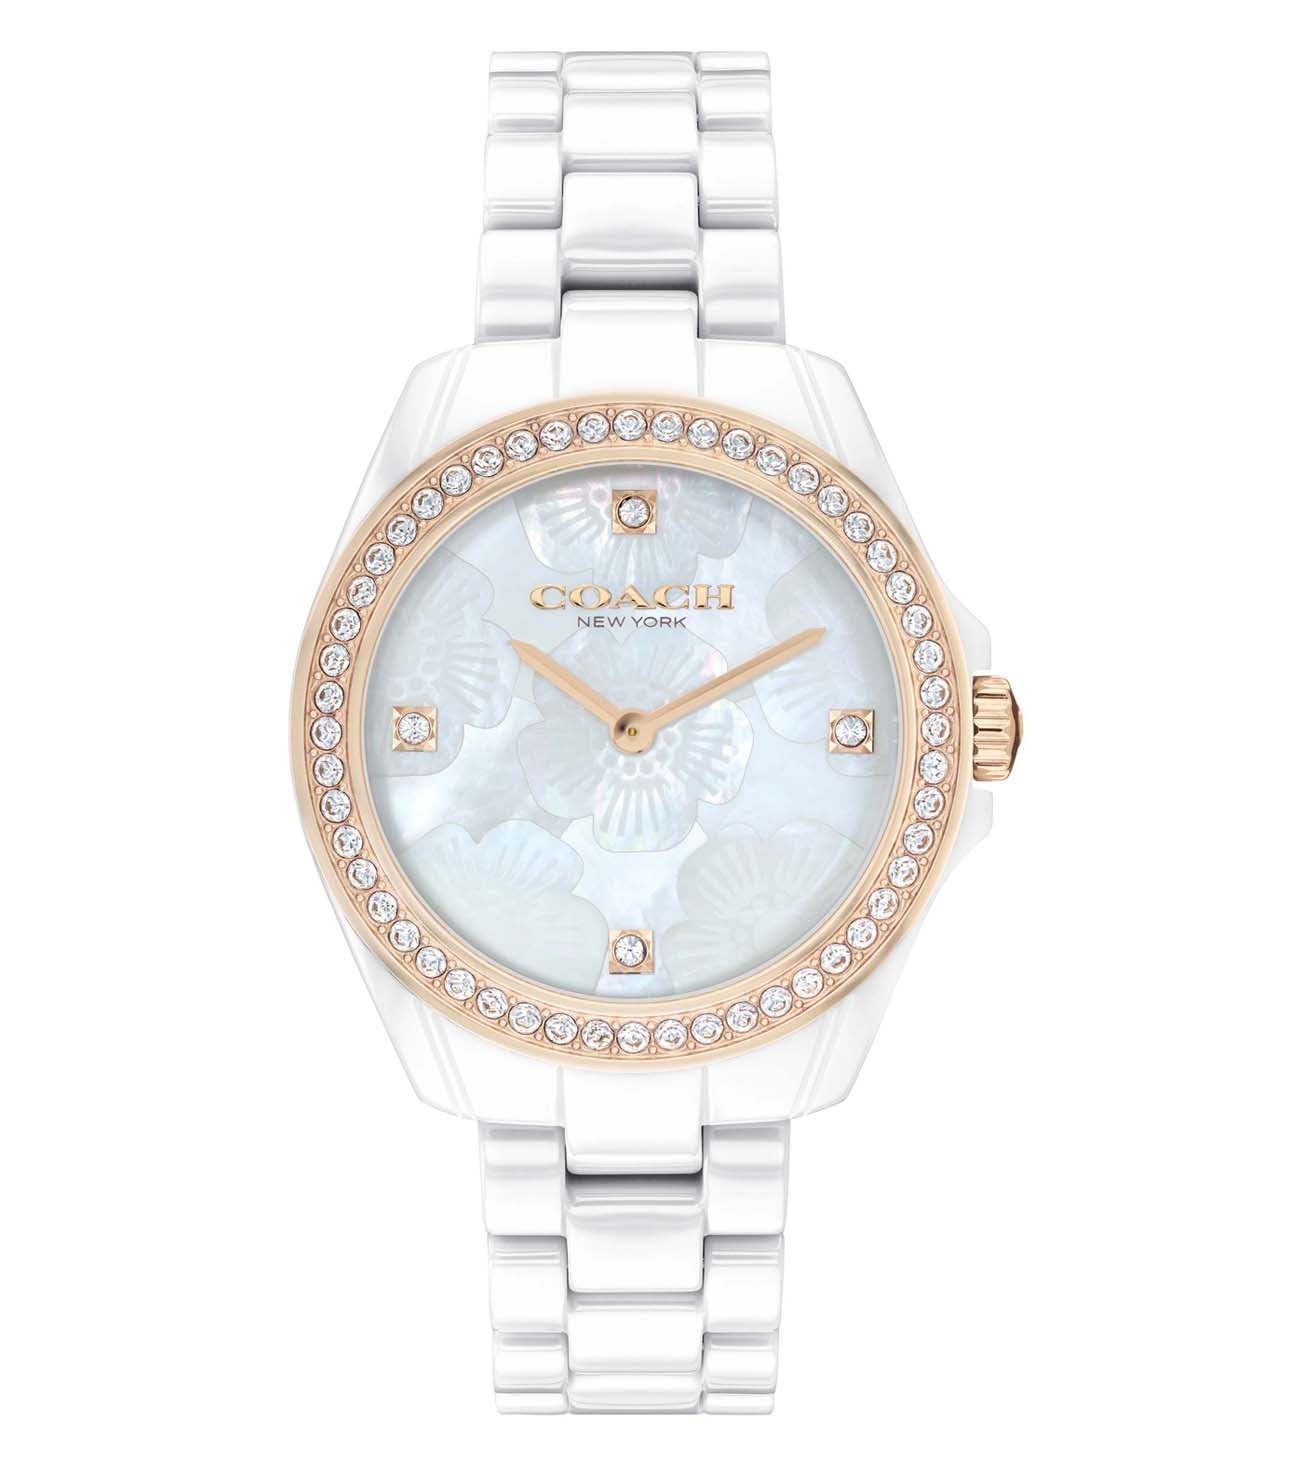 ĐỒNG HỒ COACH WOMENS 33.25 MM PRESTON MOTHER OF PEARL DIAL STAINLESS STEEL ANALOGUE WATCH 3